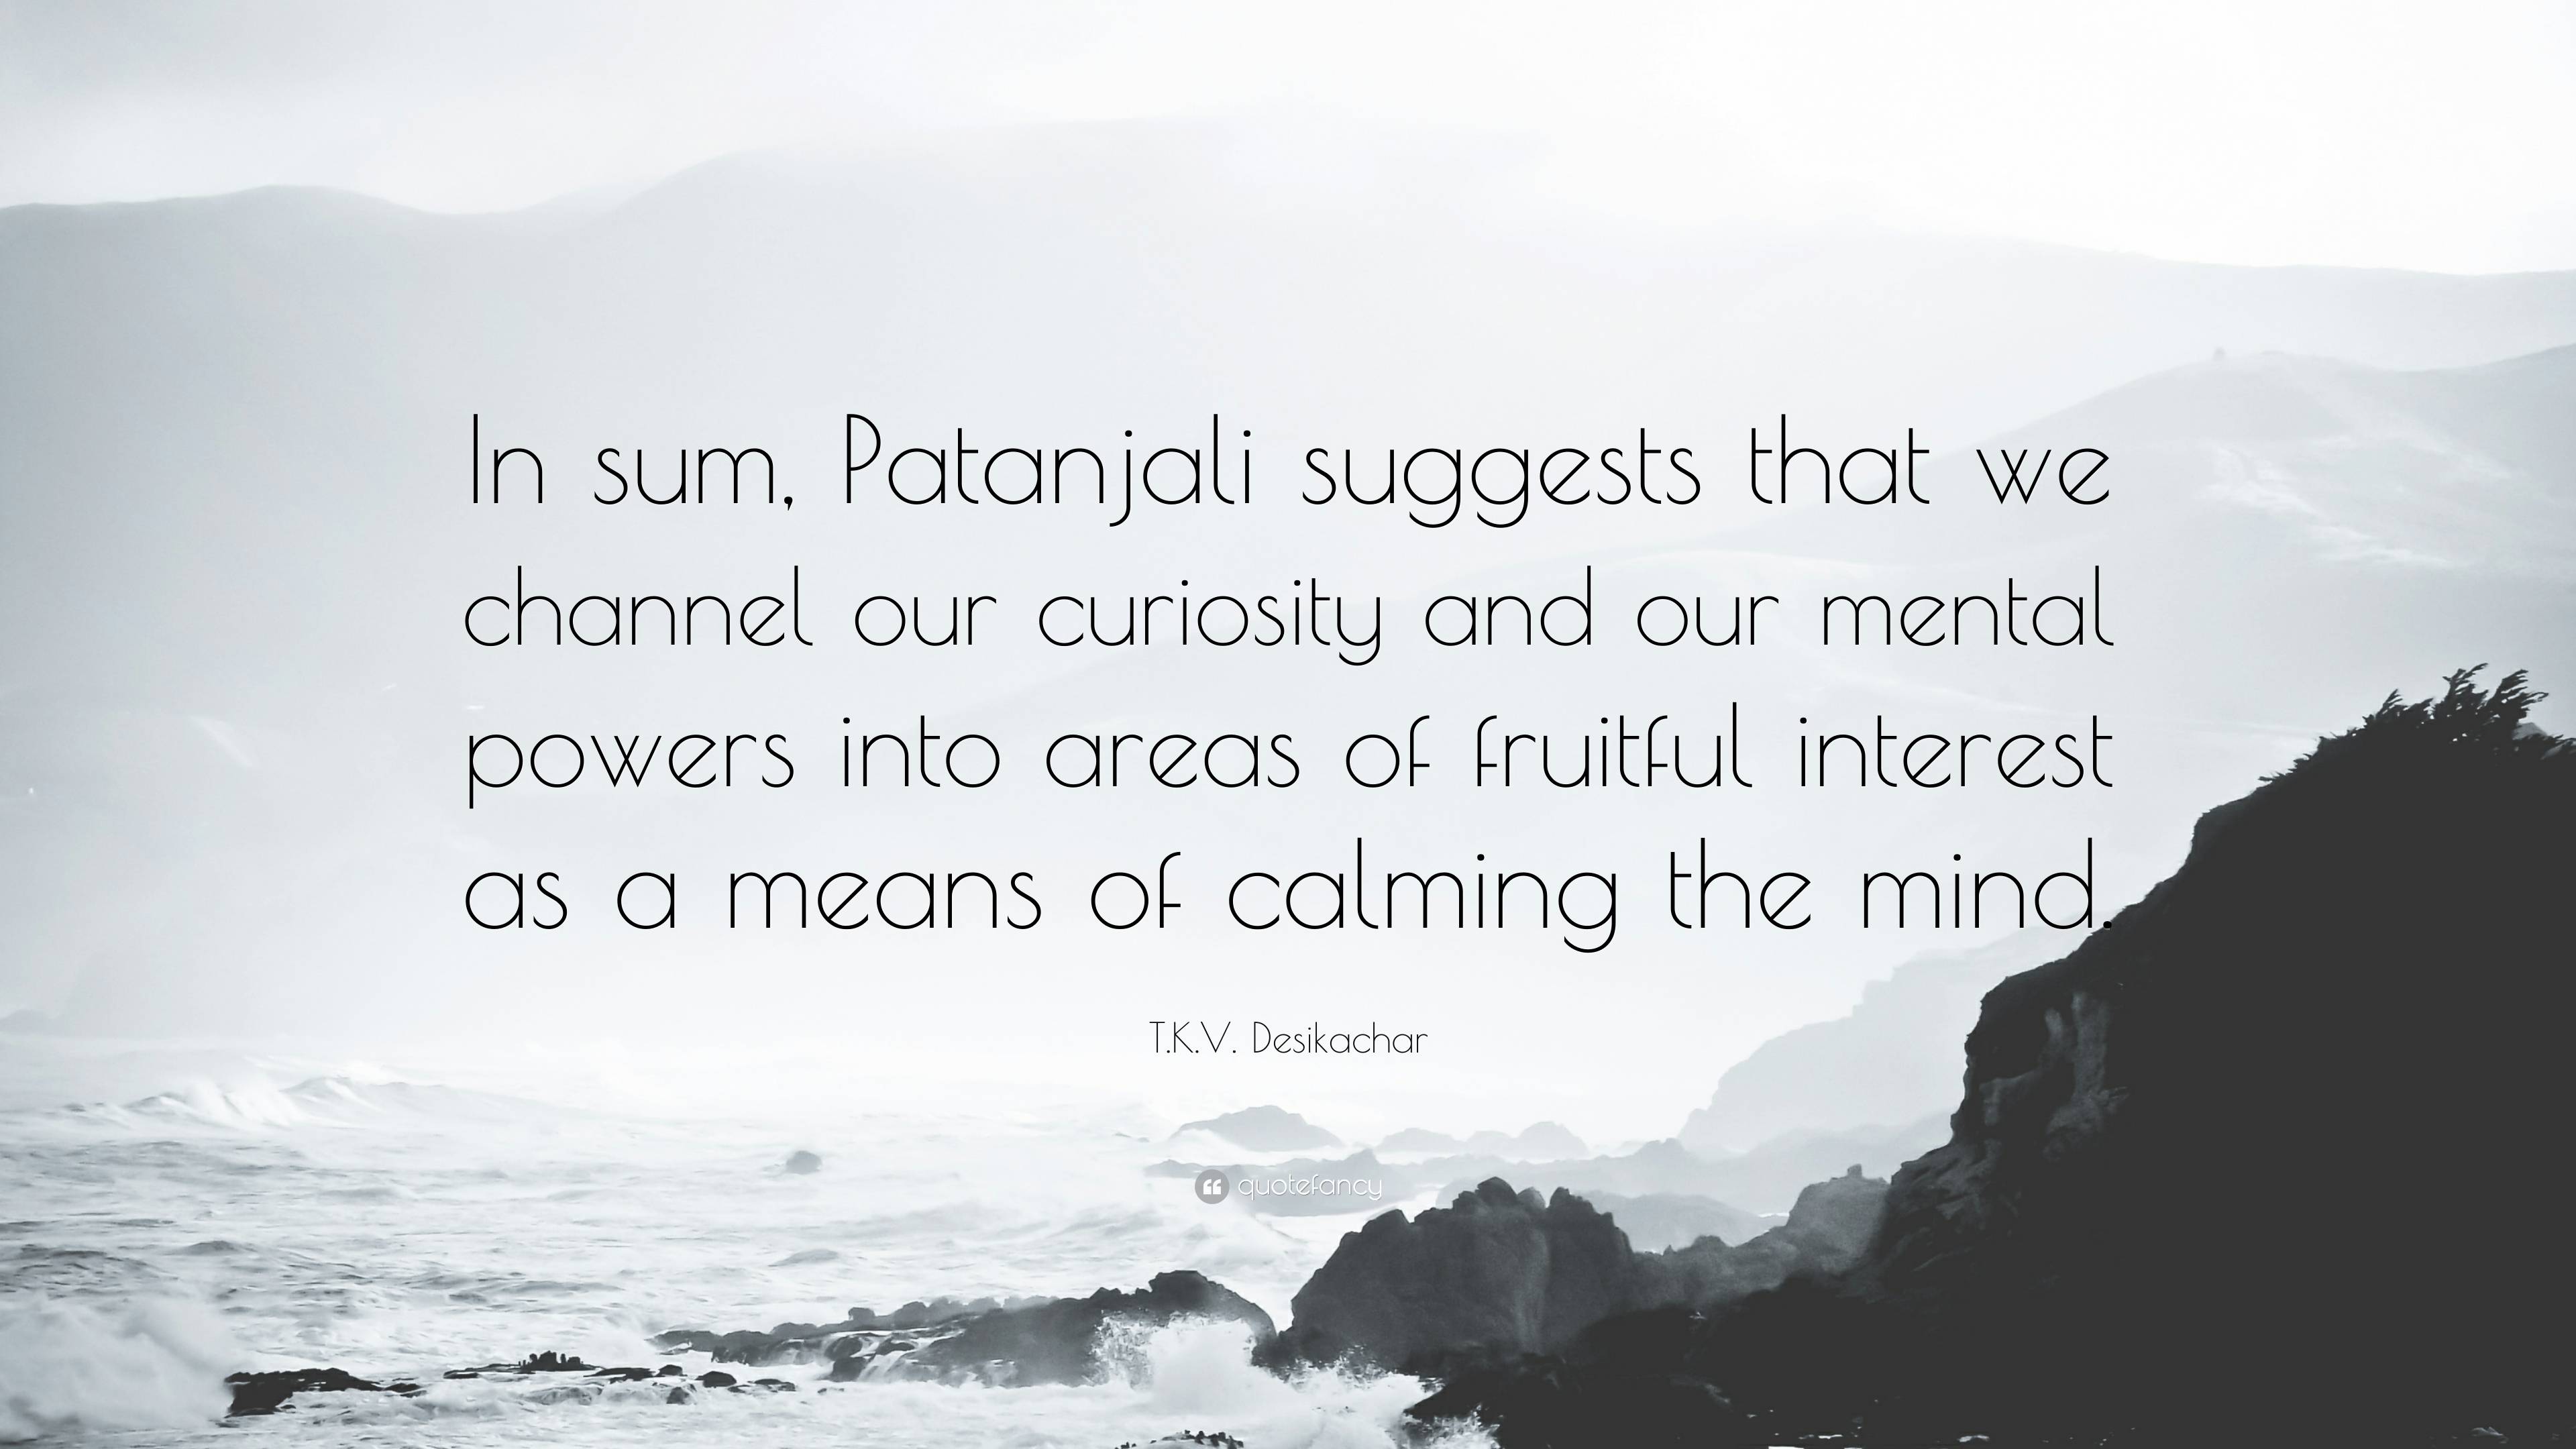 . Desikachar Quote: “In sum, Patanjali suggests that we channel our  curiosity and our mental powers into areas of fruitful interest as a  mean...”